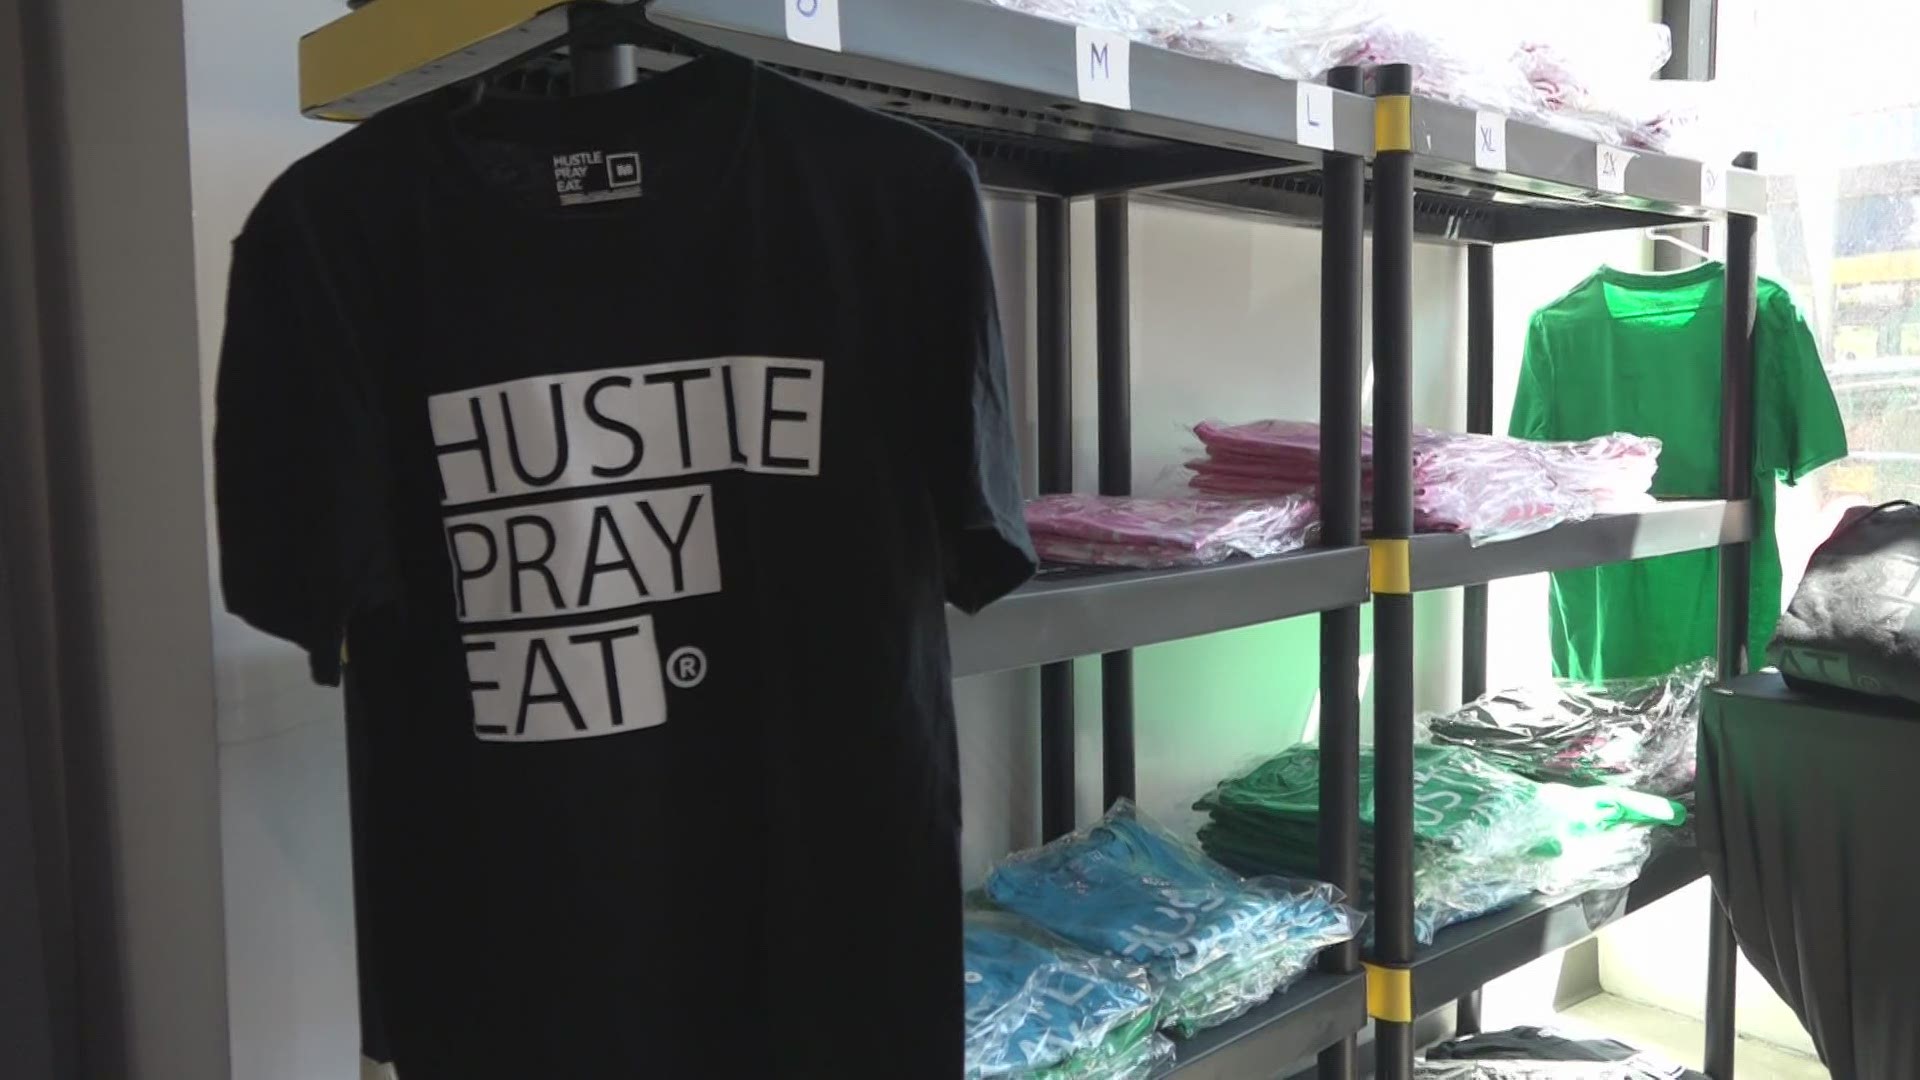 A local small business started by a Grand Rapids man is spreading a message hoping to inspire people.